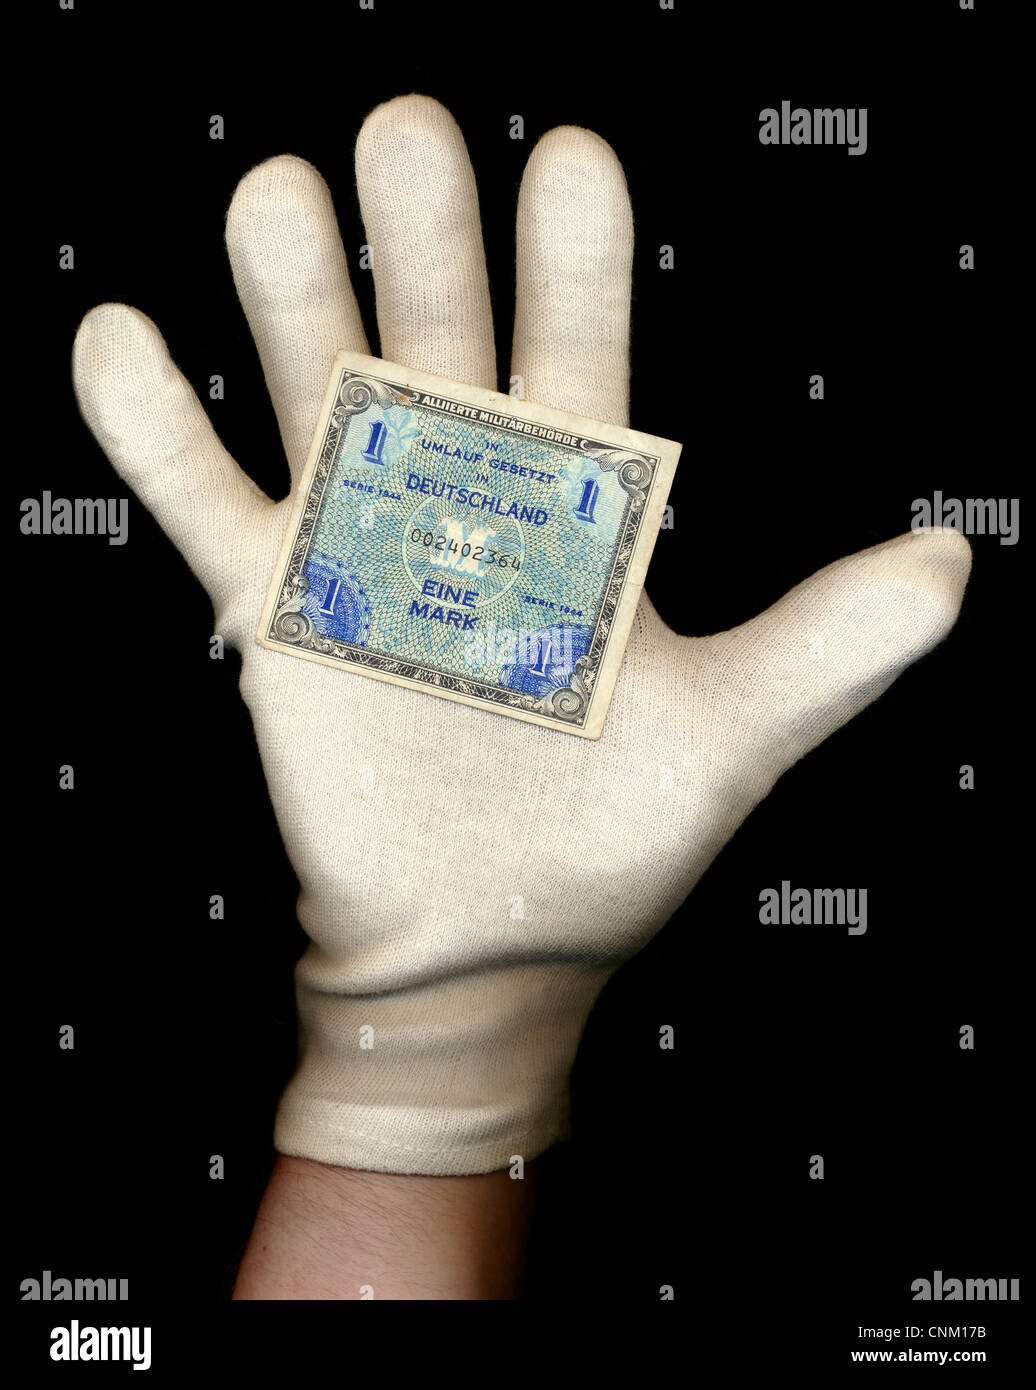 A hand with a white glove holds a banknote, Reichsbank, Allied Occupation, value 1 Mark, 1944, Germany, Europe , Stock Photo